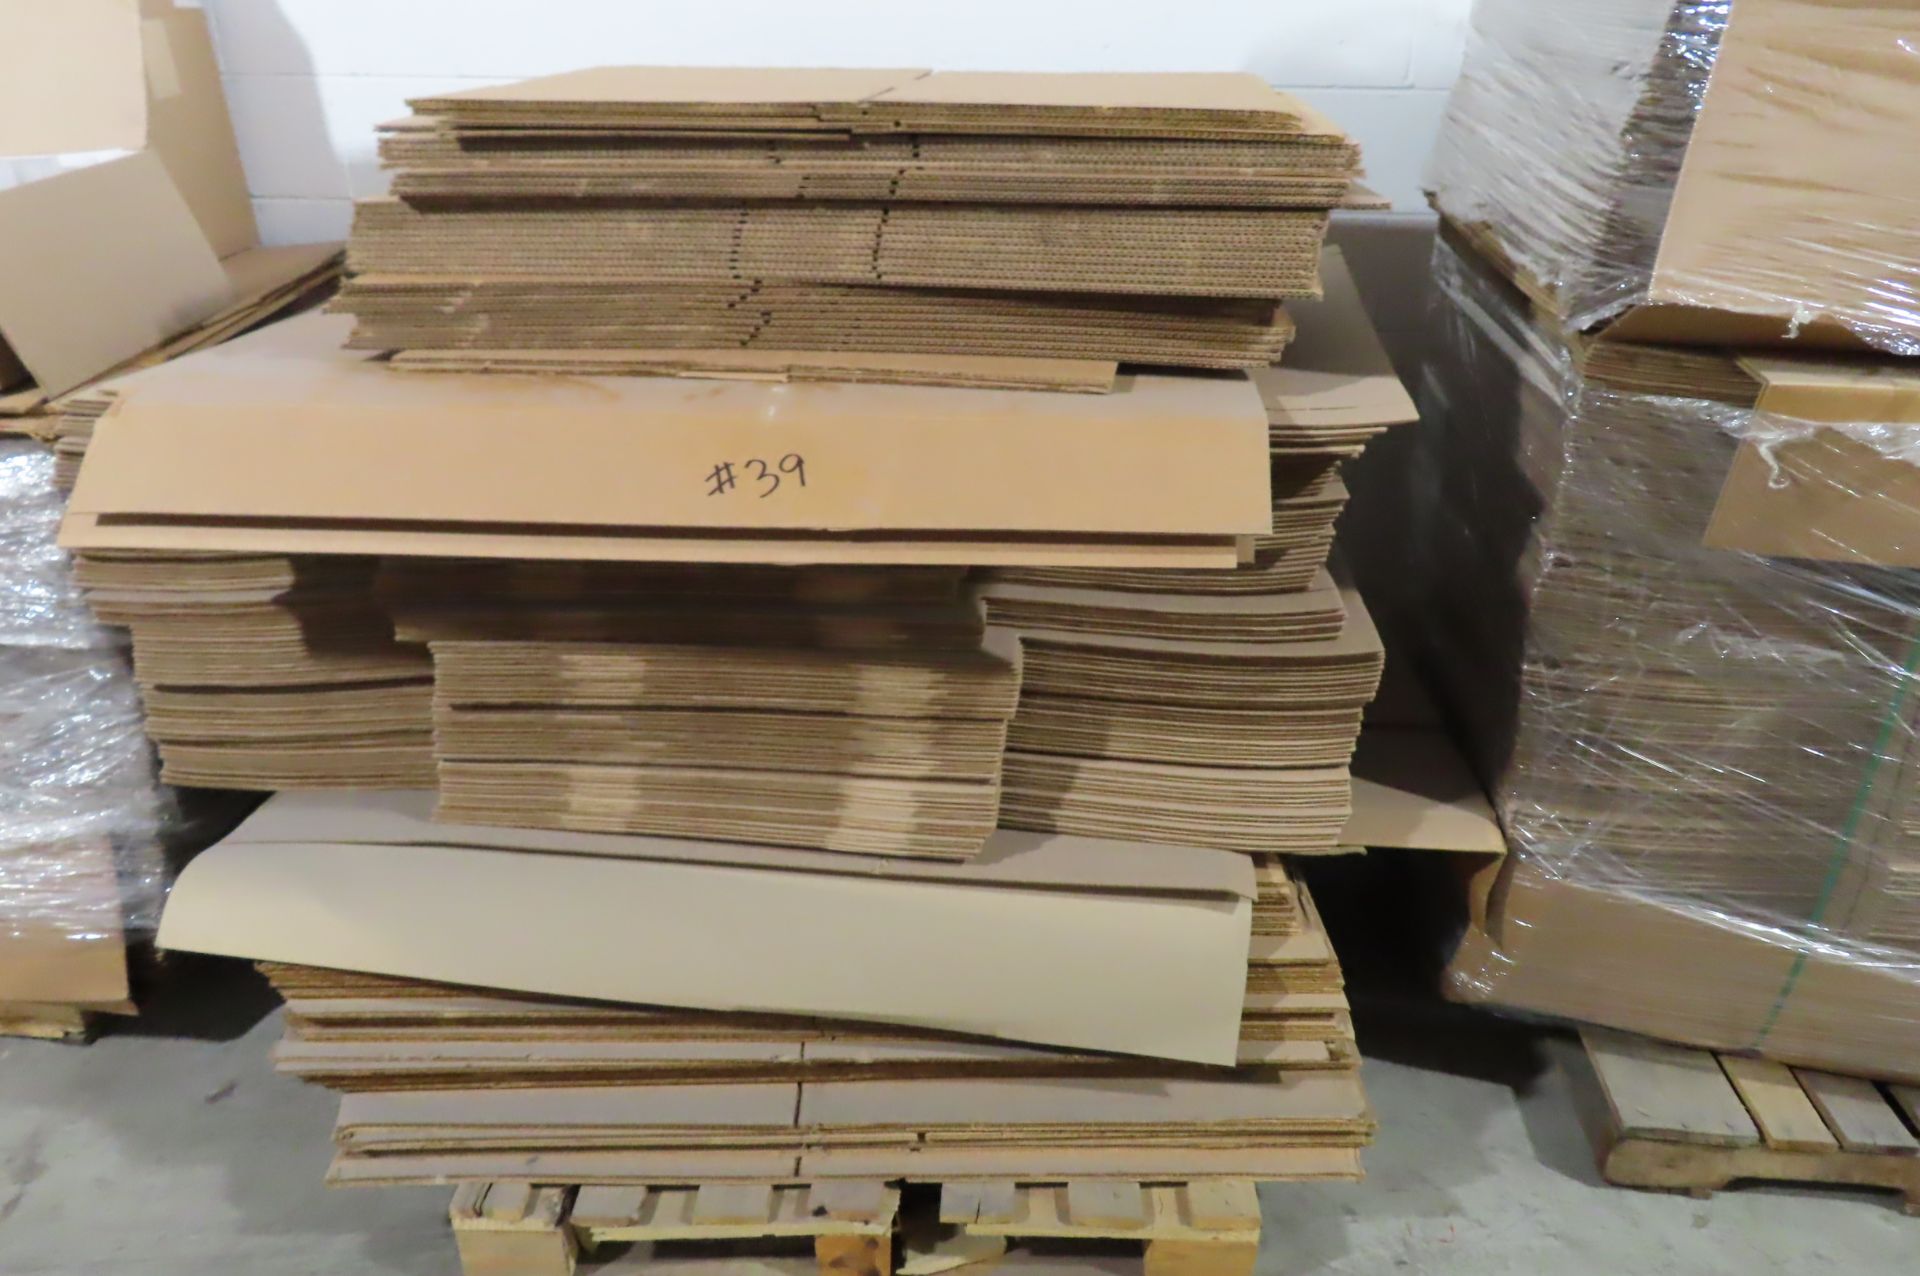 ASSORTED PACKAGING SUPPLIES, CORRUGATED BOXES, LIDS, CHIP BOARD SHEETS, SHIPPING TUBES... - Image 8 of 12